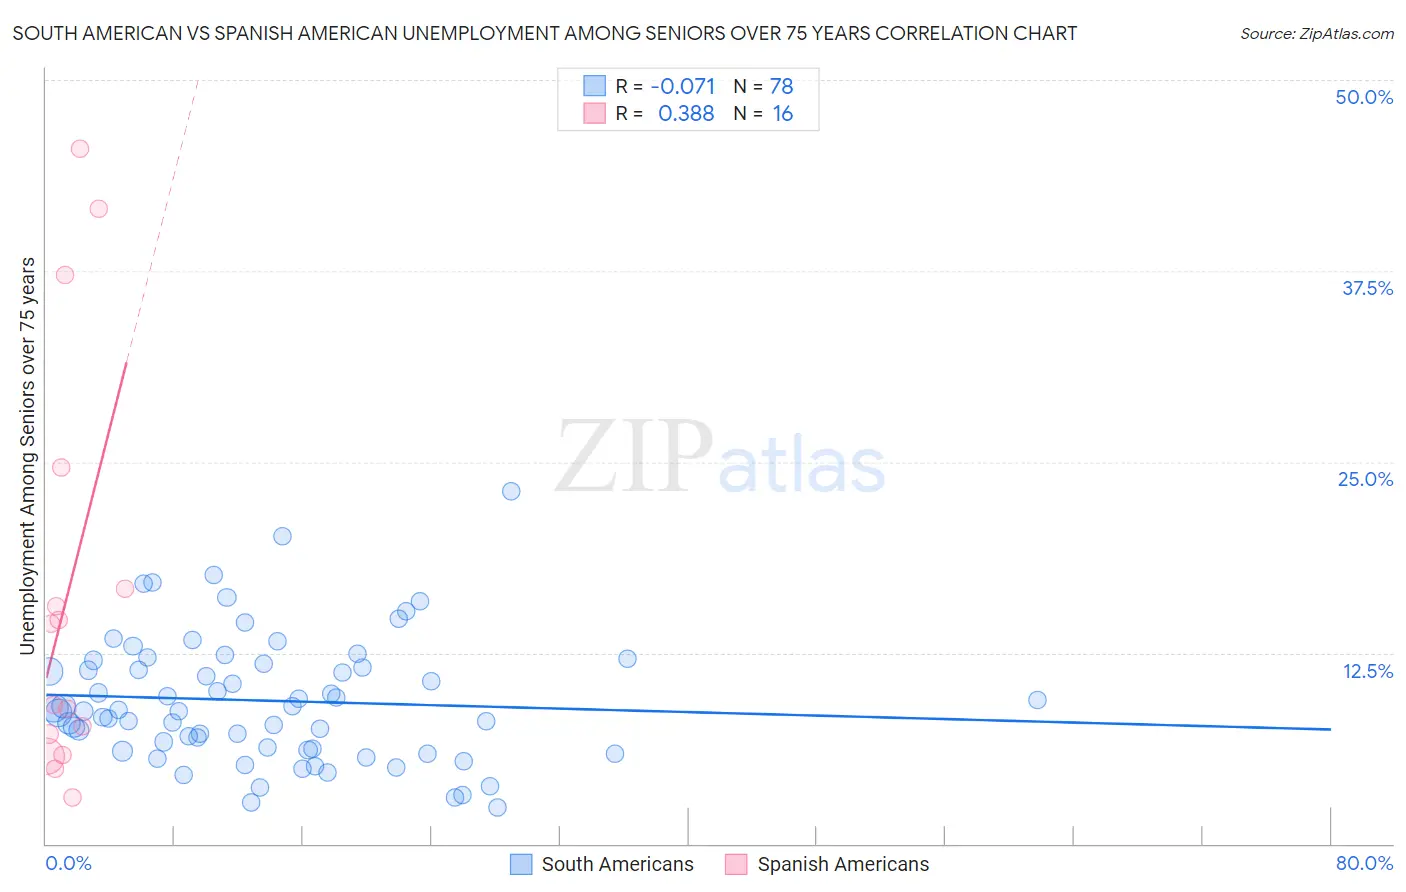 South American vs Spanish American Unemployment Among Seniors over 75 years